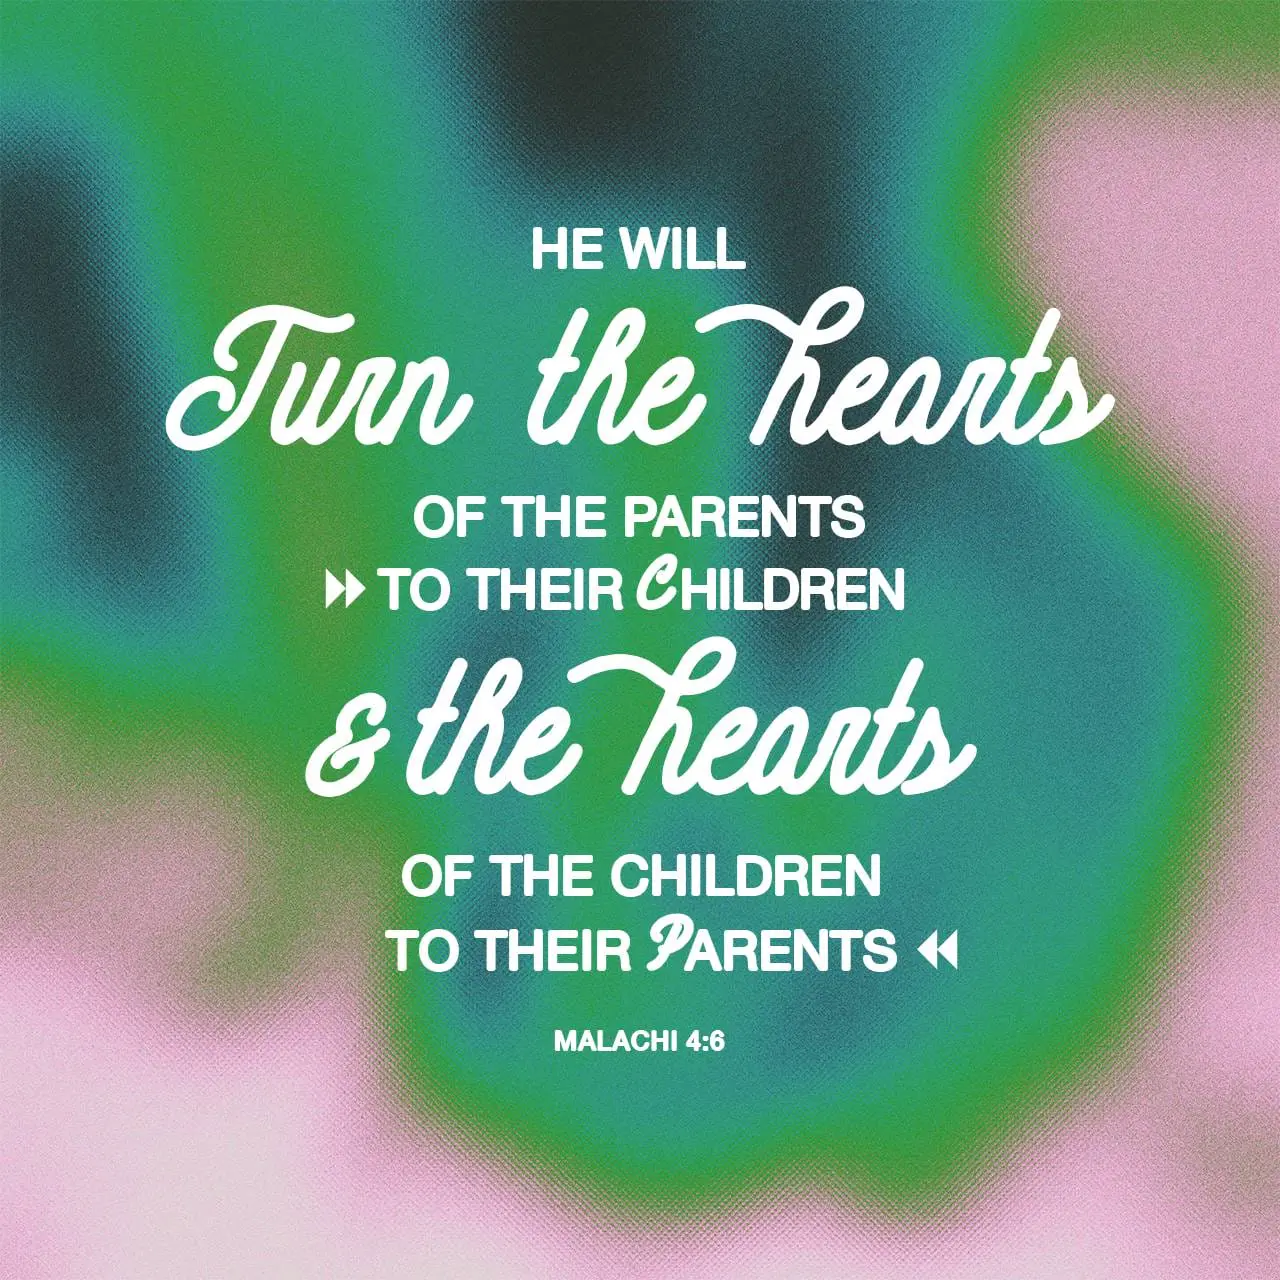 He will turn the hearts of the parents to their children and the hearts of the children to their parents. Malachi 4:6